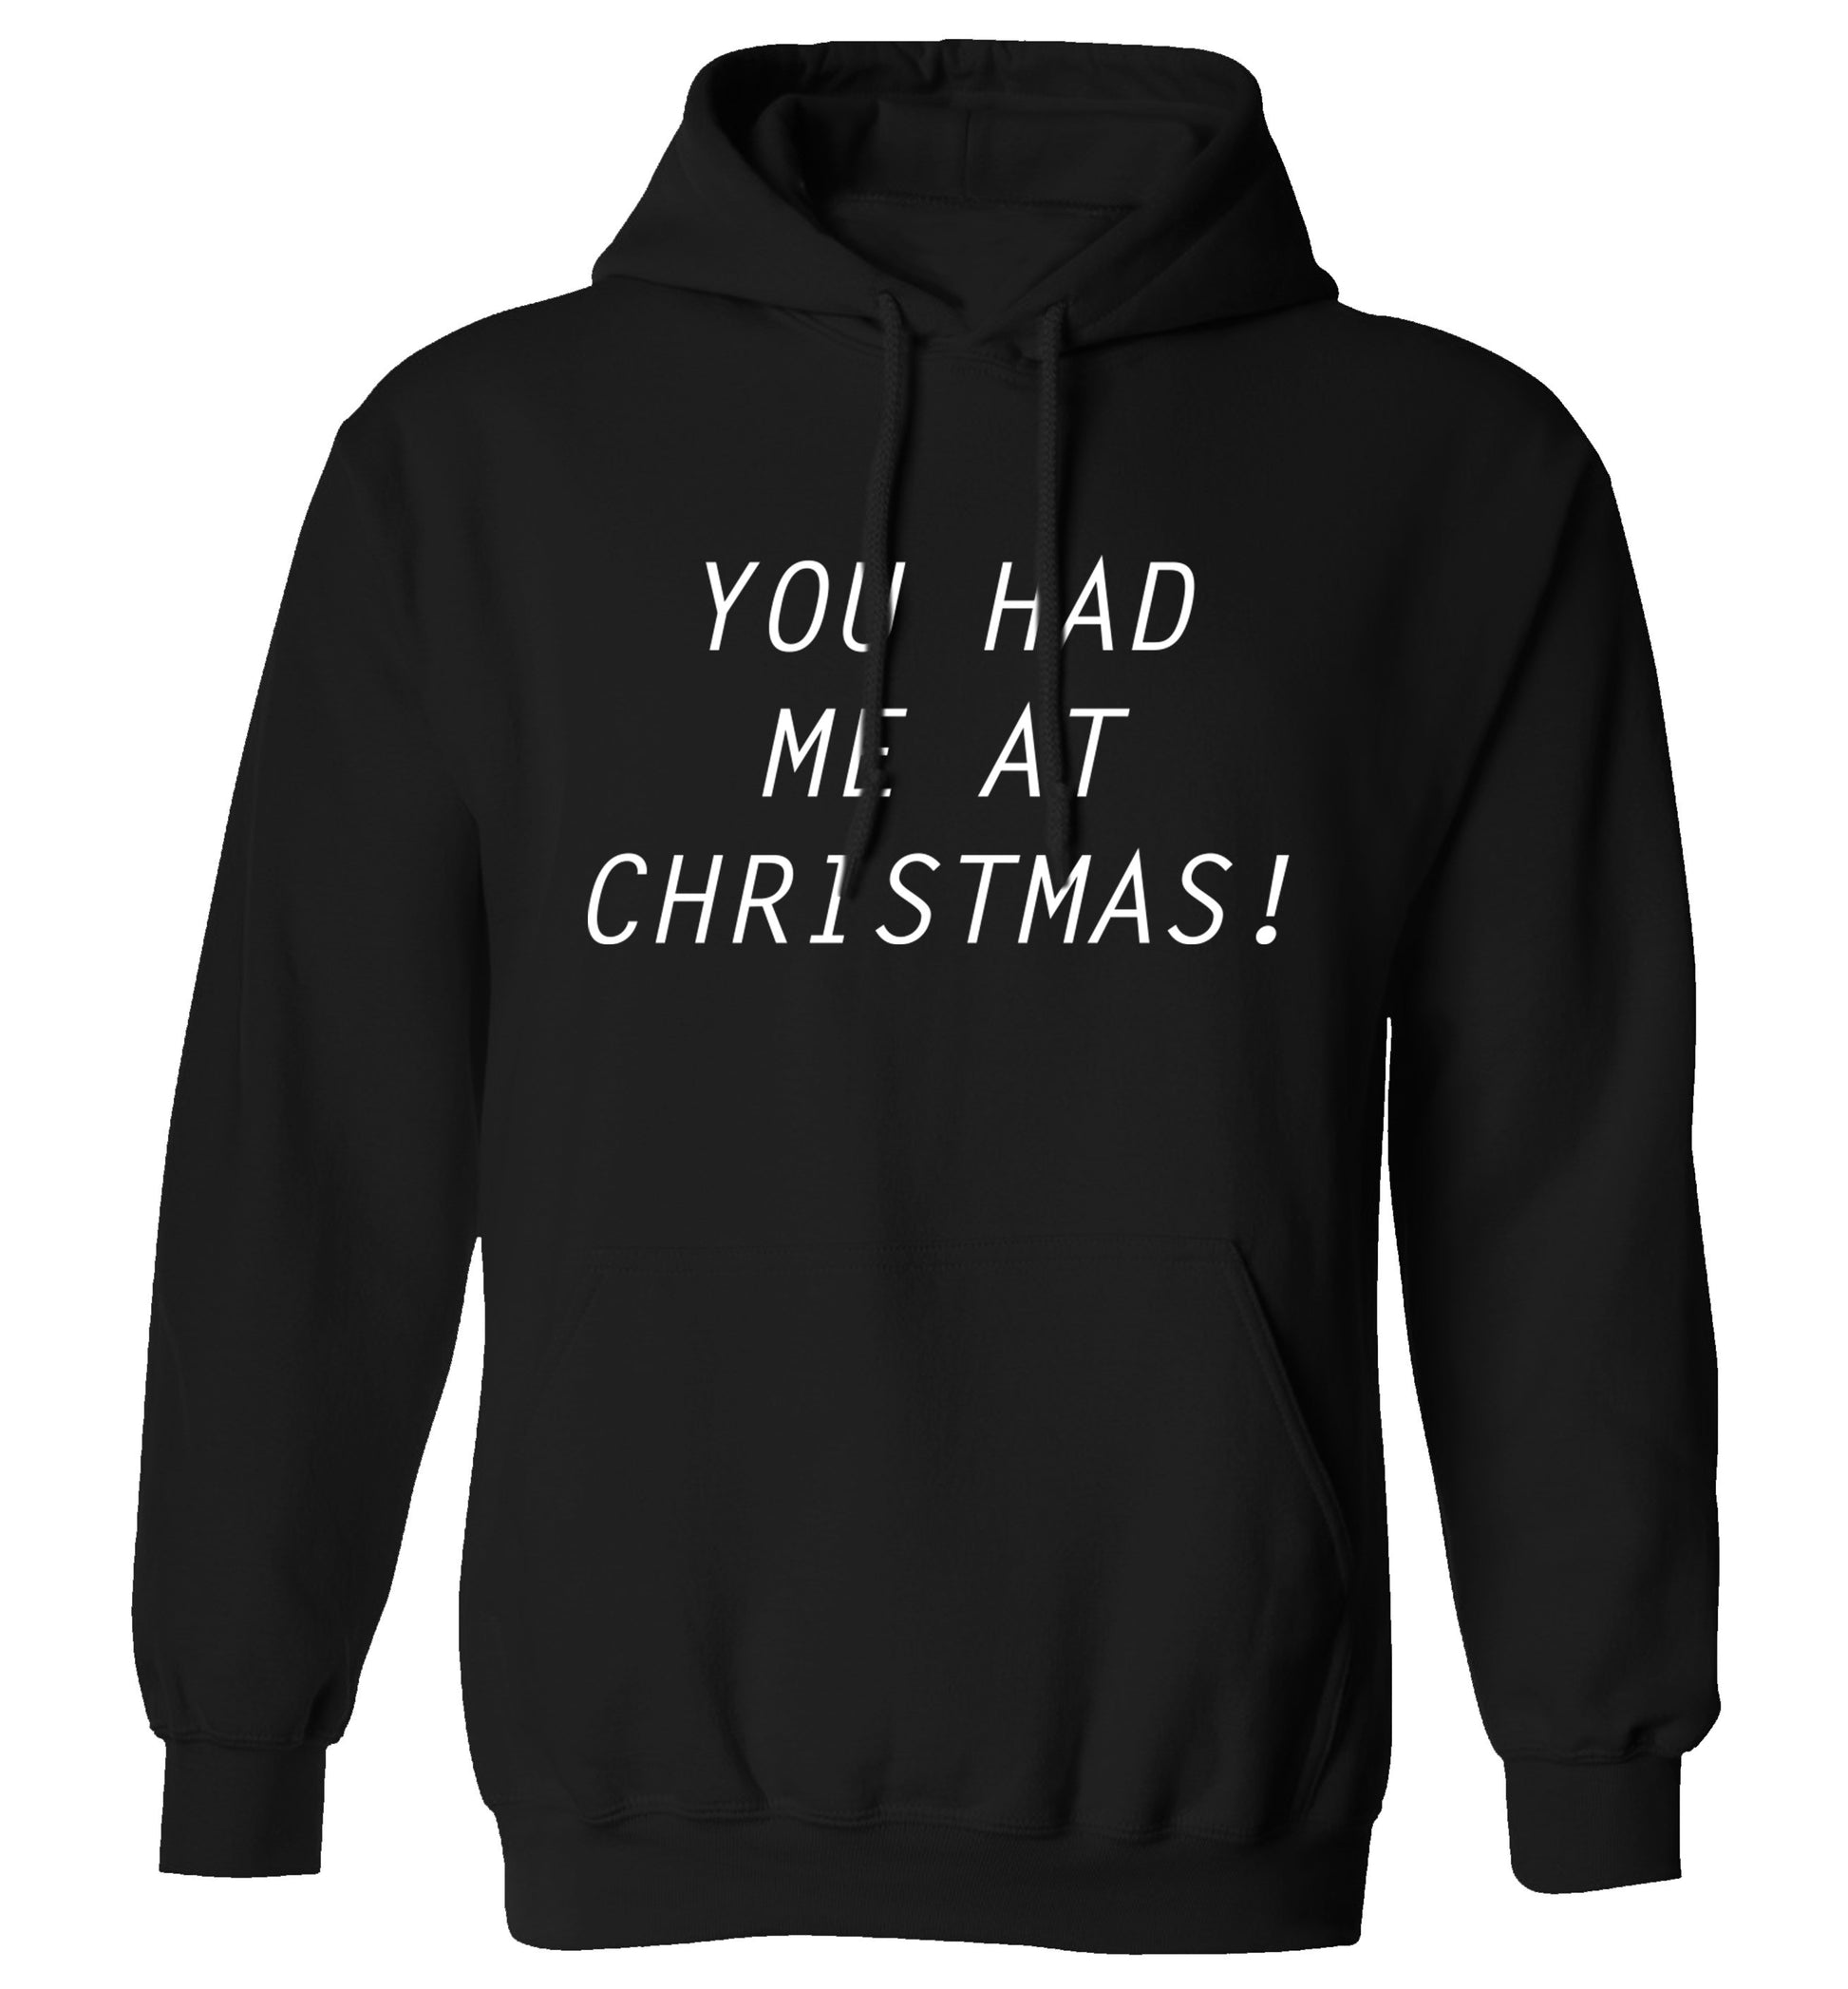 You had me at Christmas adults unisex black hoodie 2XL